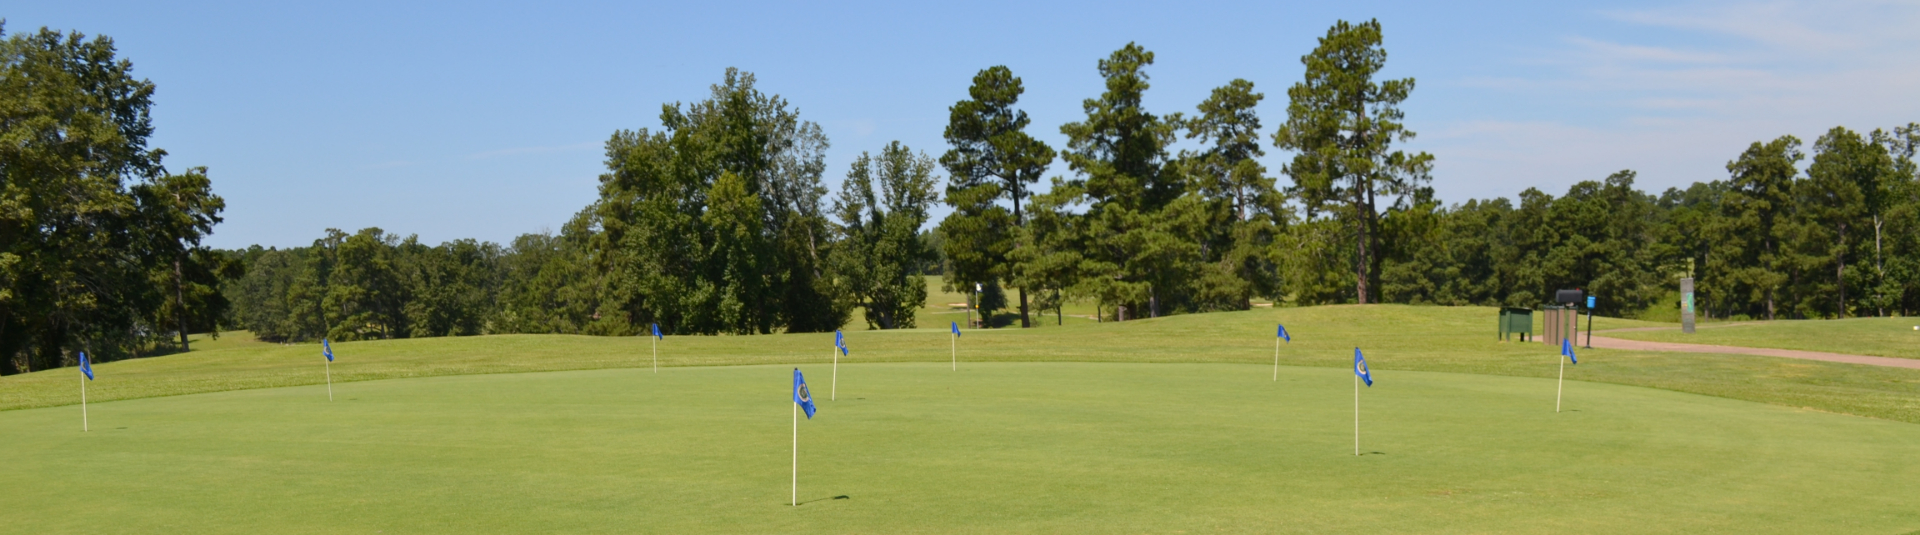 Course greens, trees in background and blue flag in foreground 